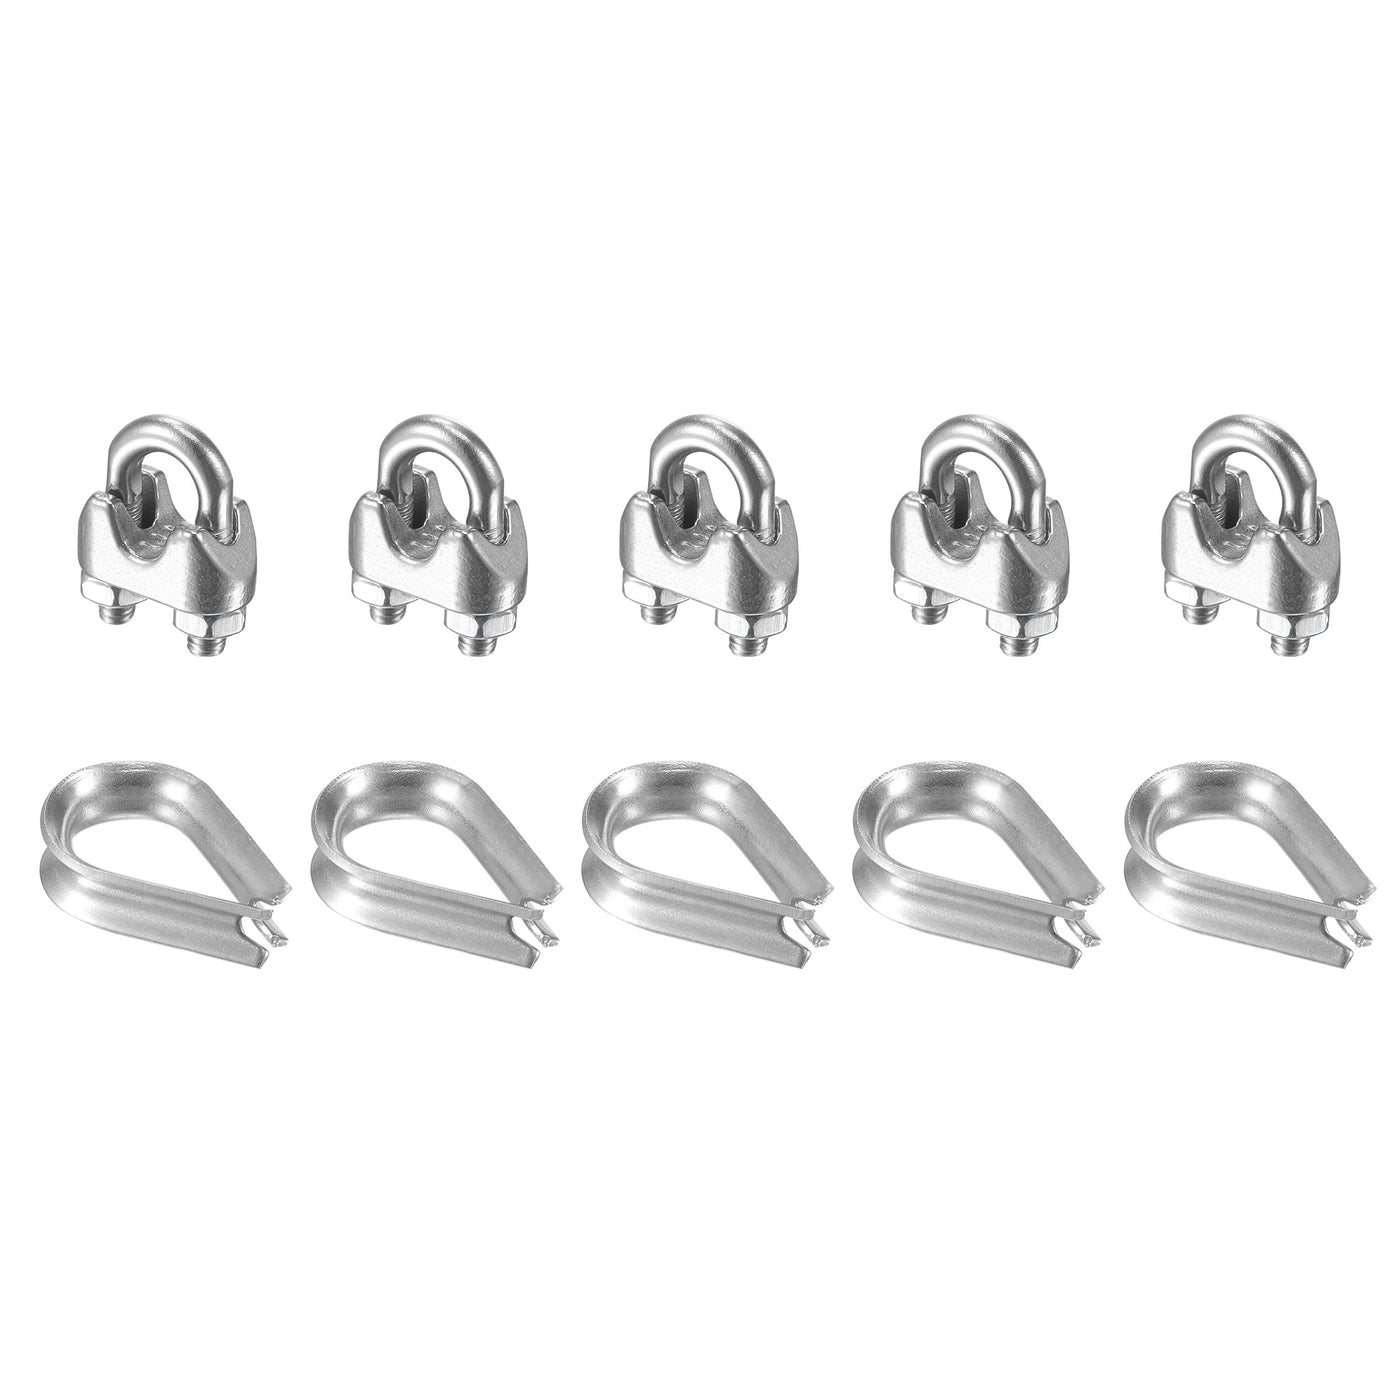 uxcell Uxcell Wire Rope Cable Clip Kit for M3, Included Rope Clamp 5Pcs and Thimble Rigging 5Pcs, 304 Stainless Steel U Bolt Saddle Fastener